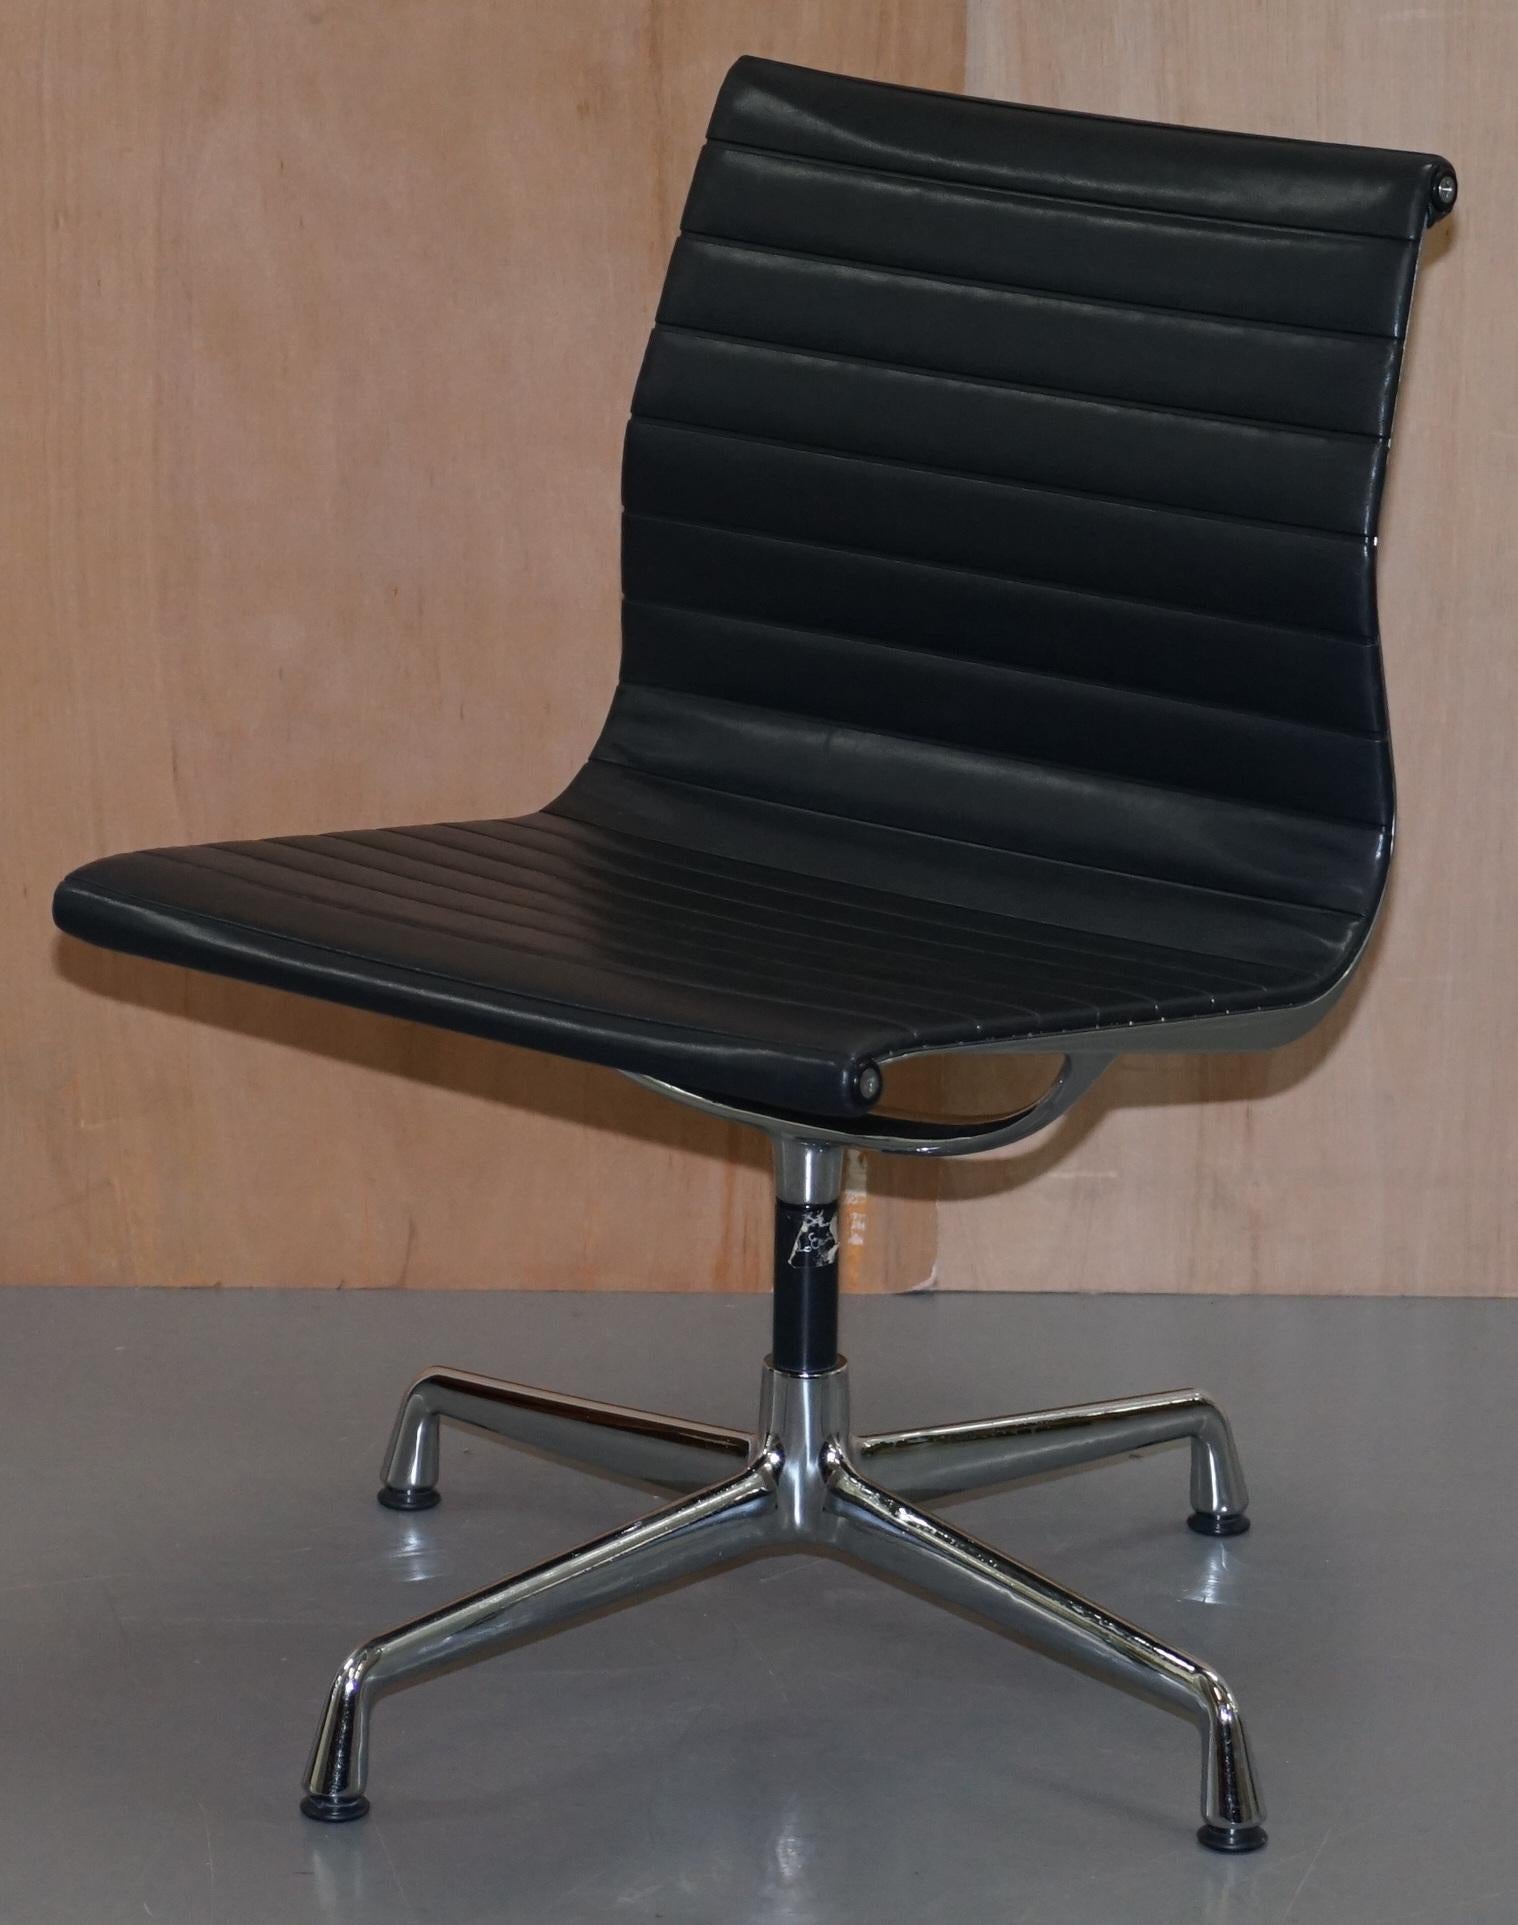 1 of 2  EA101 Vitra Eames Black Leather Office Swivel Conference Chairs 6